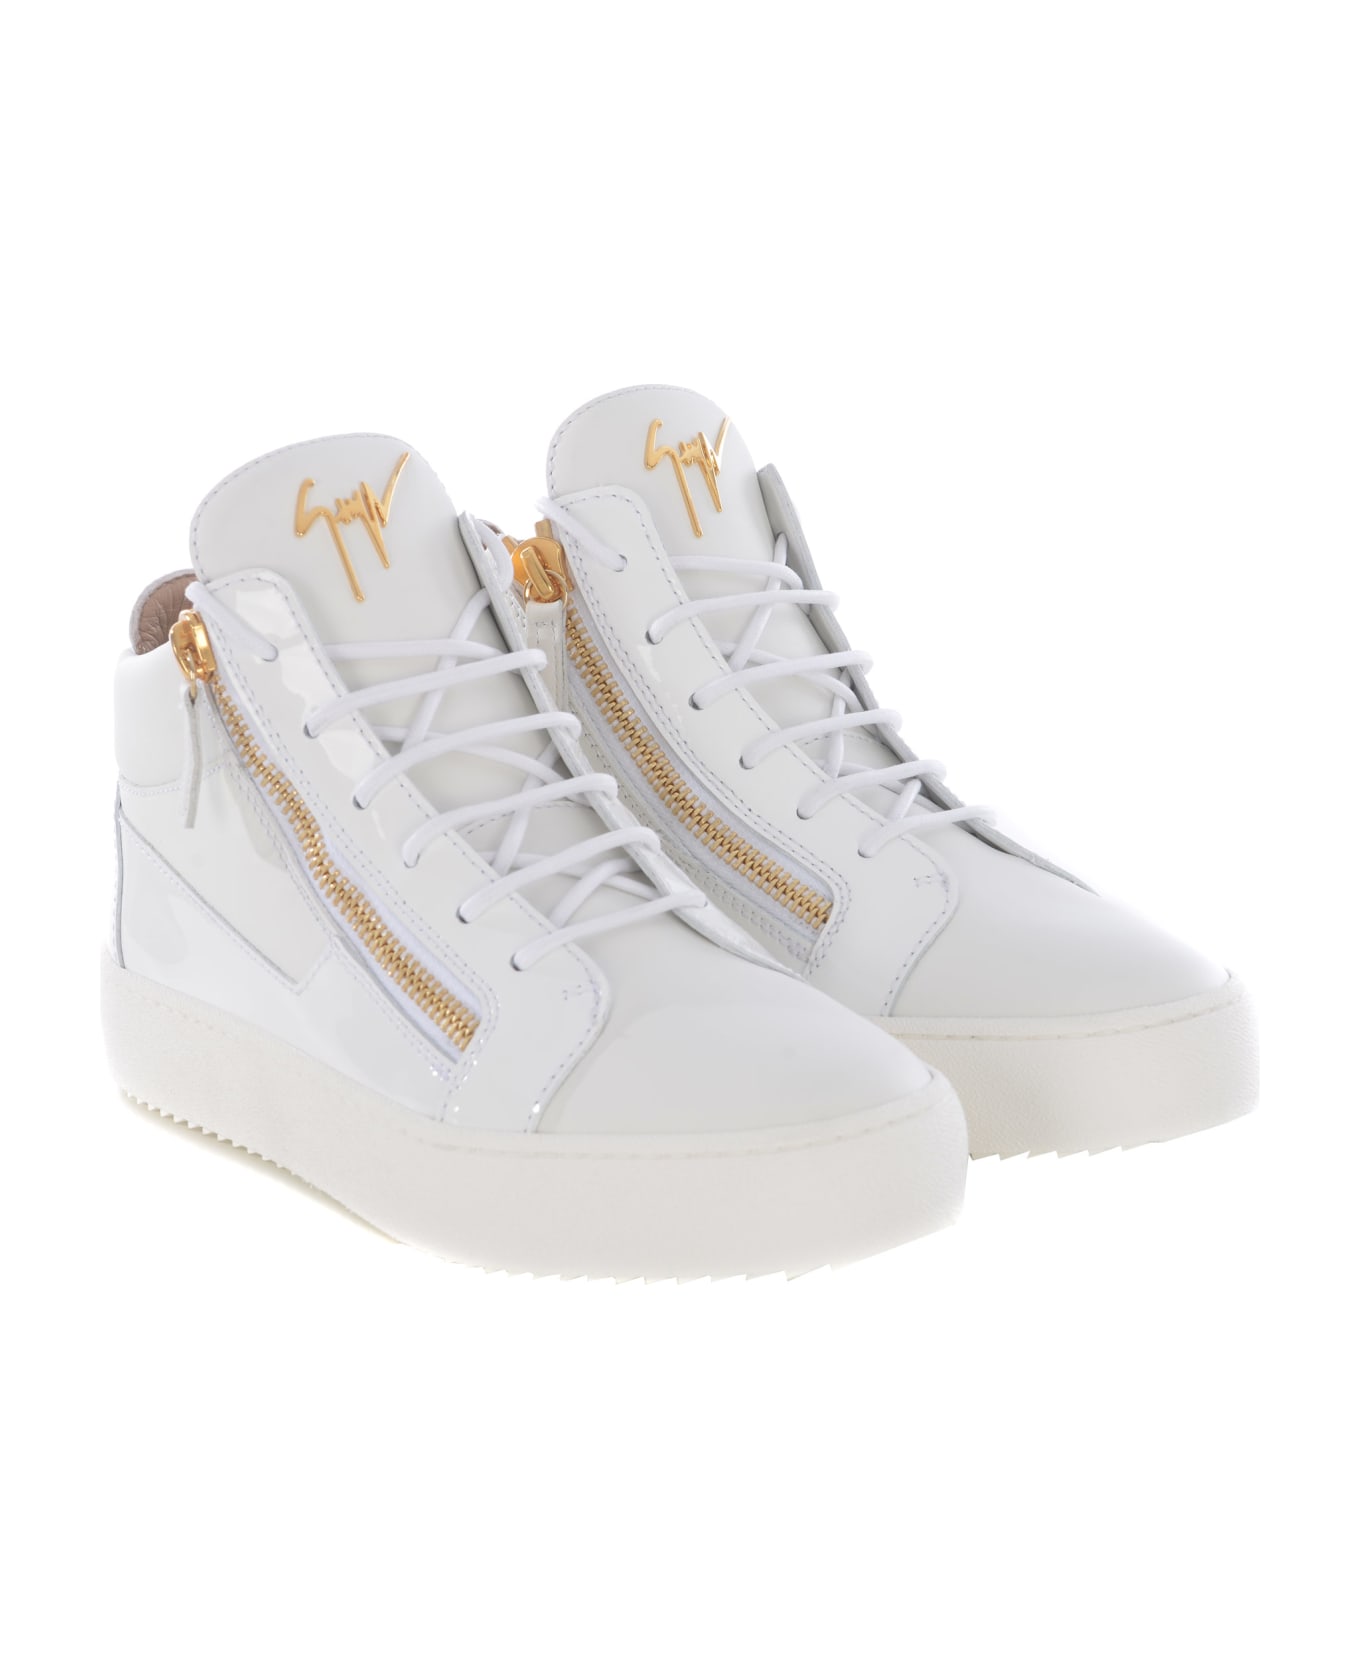 Giuseppe Zanotti High Sneakers Giuseppe Zanotti "hi-top" In Leather And Patent Leather - Bianco スニーカー